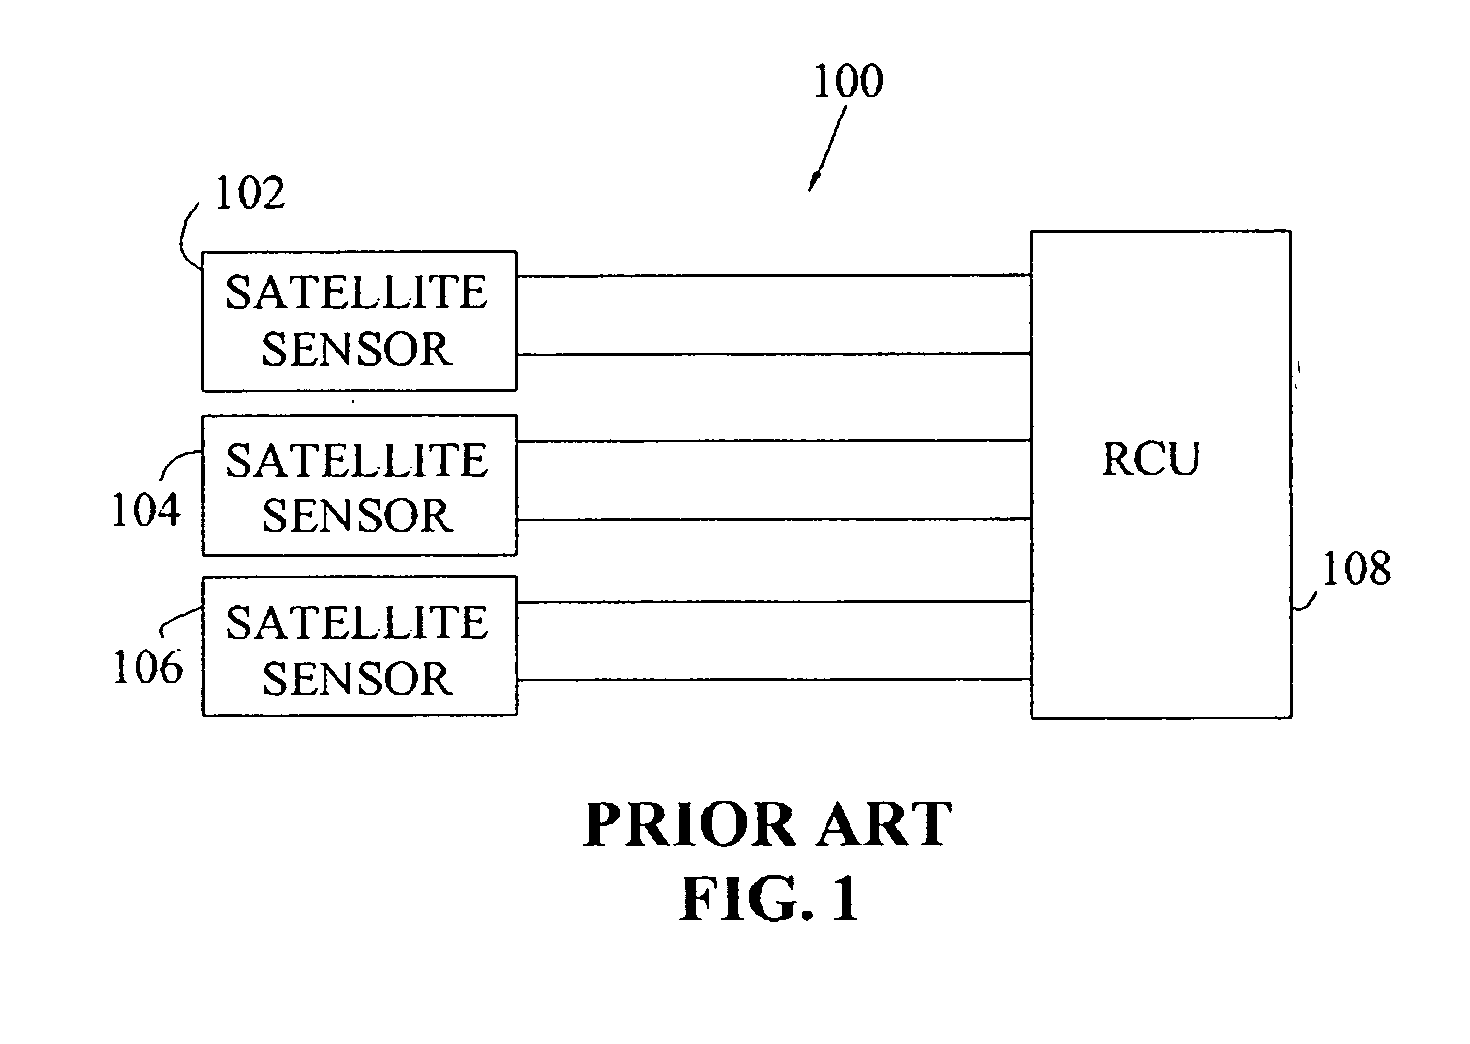 Method for multiple sensors to communicate on a uni-directional bus